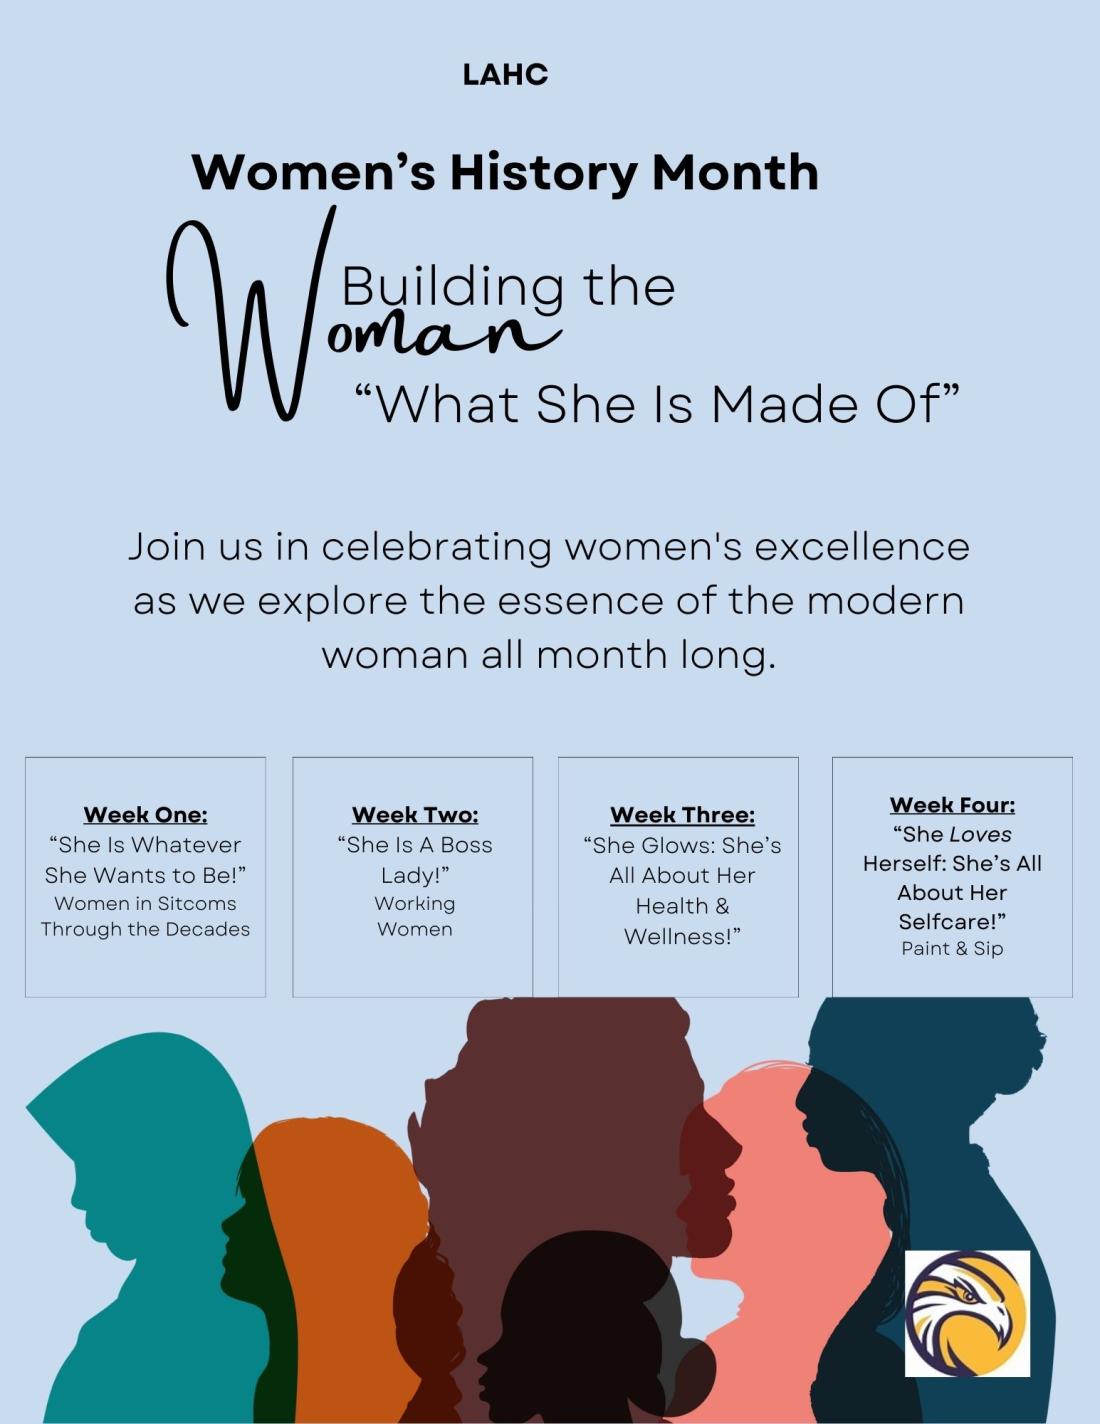 LAHC Women's History Month